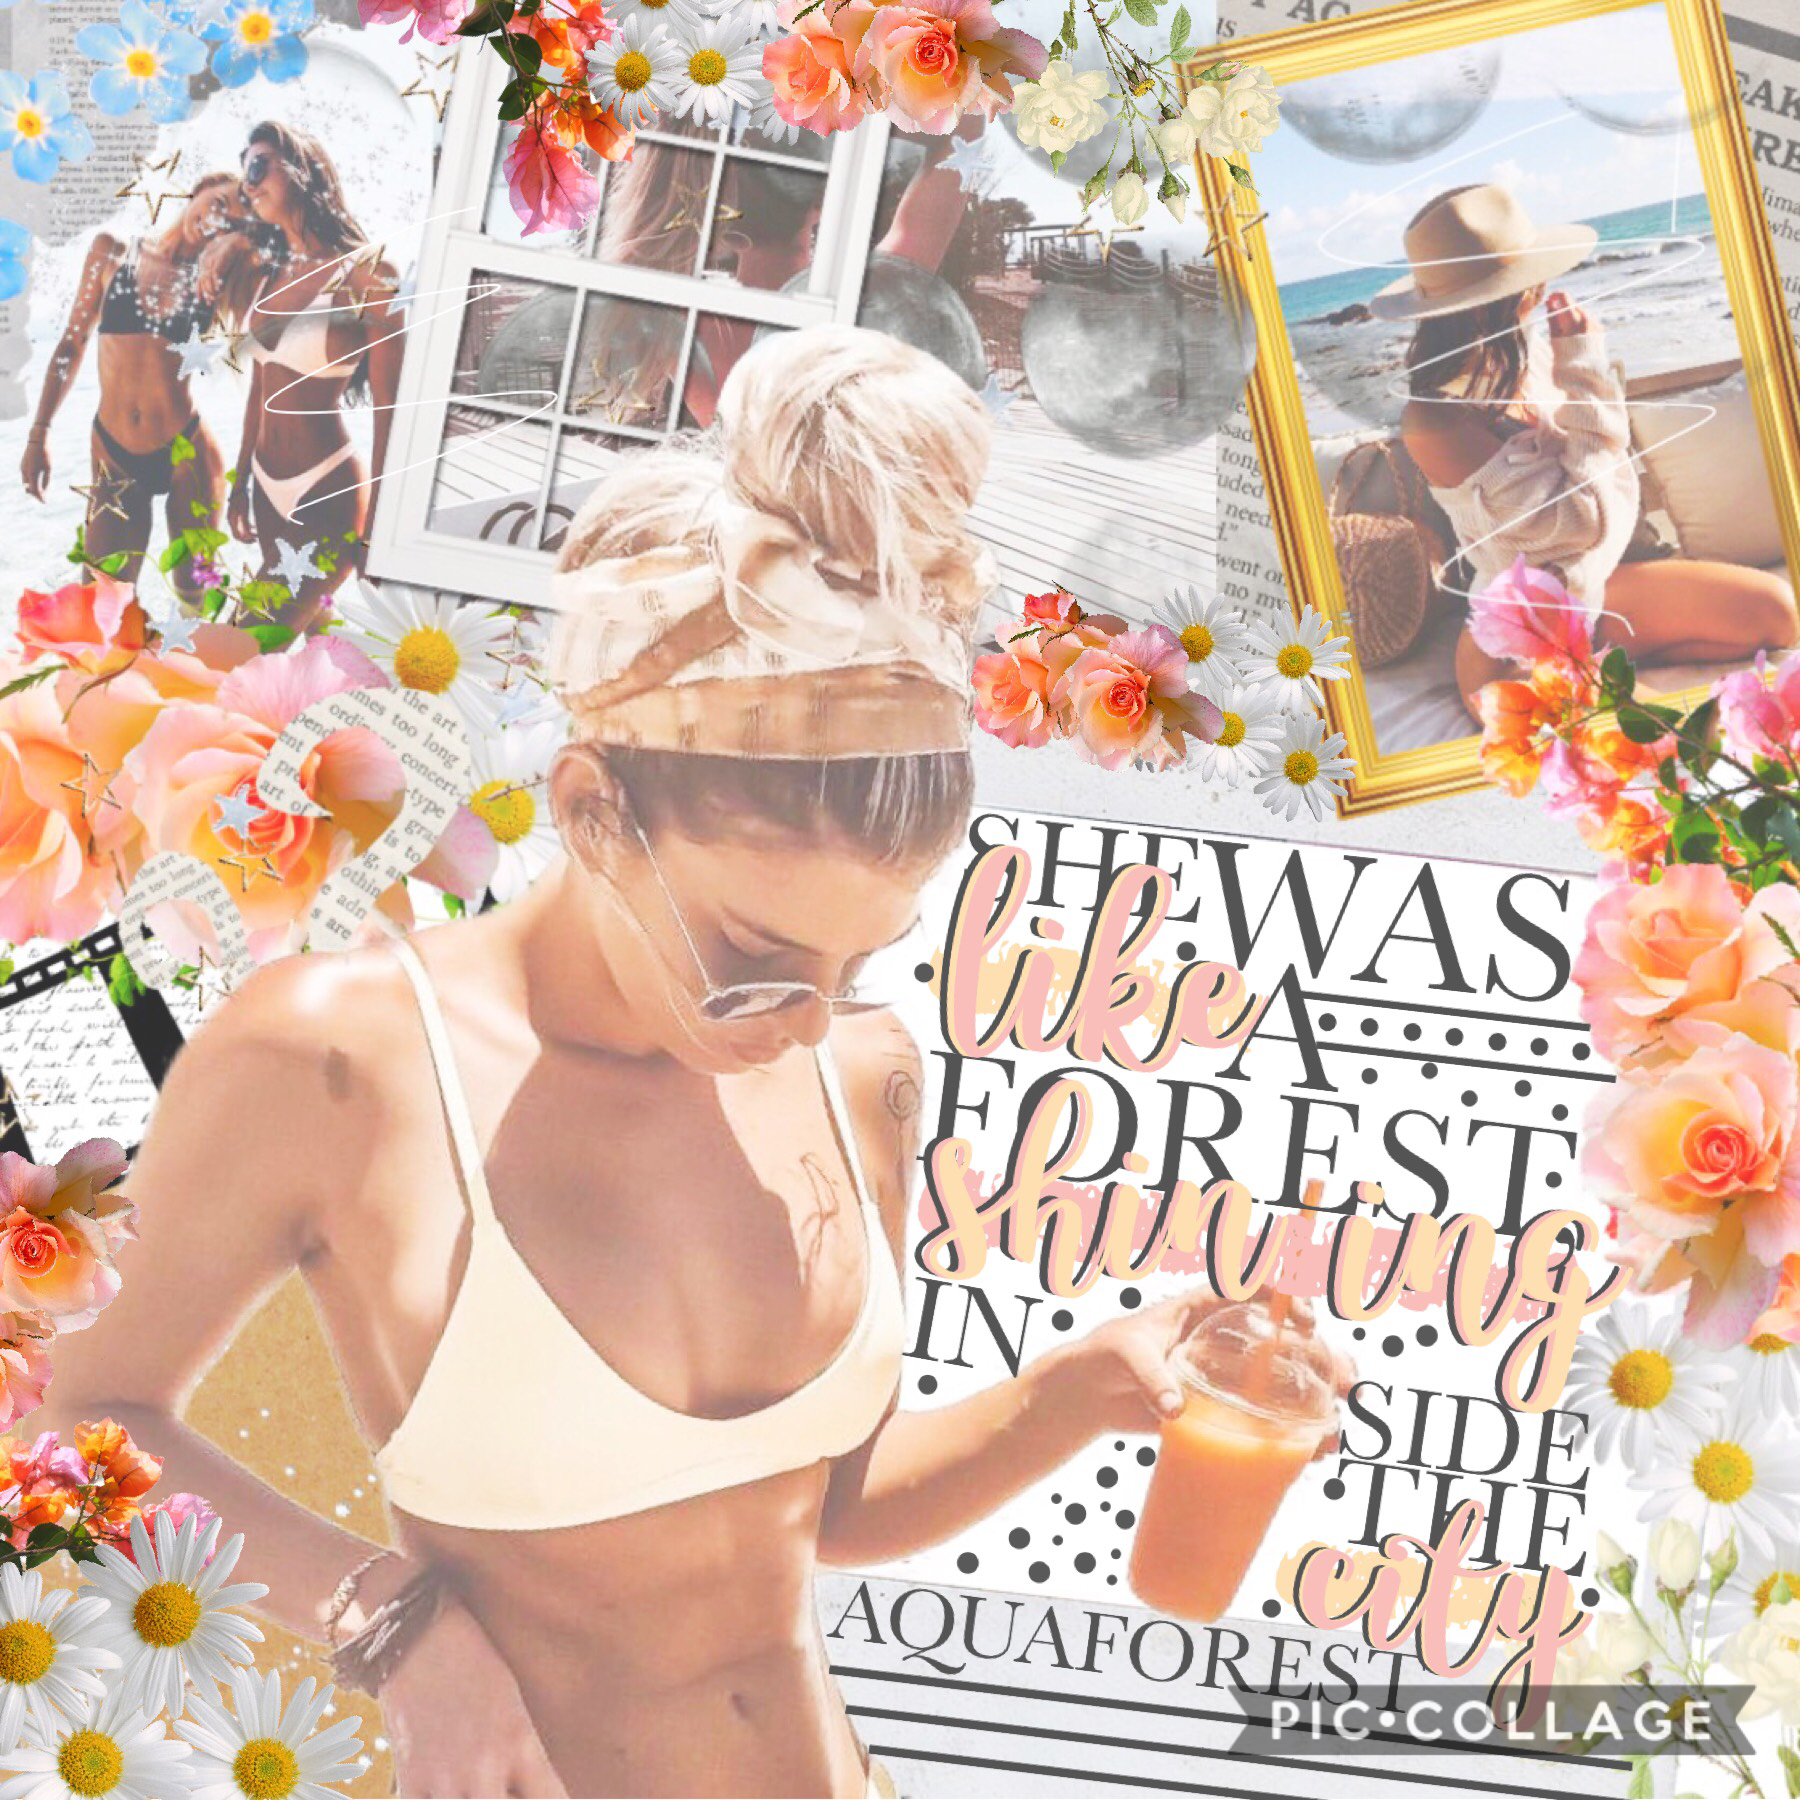 TAPPPPP
The colour theme is rlly weird 😑😬
Inspo and png credit: blossomed-
Text inspo credit: meandmeonly 
Is this good enough for my new style? 🙃🤨